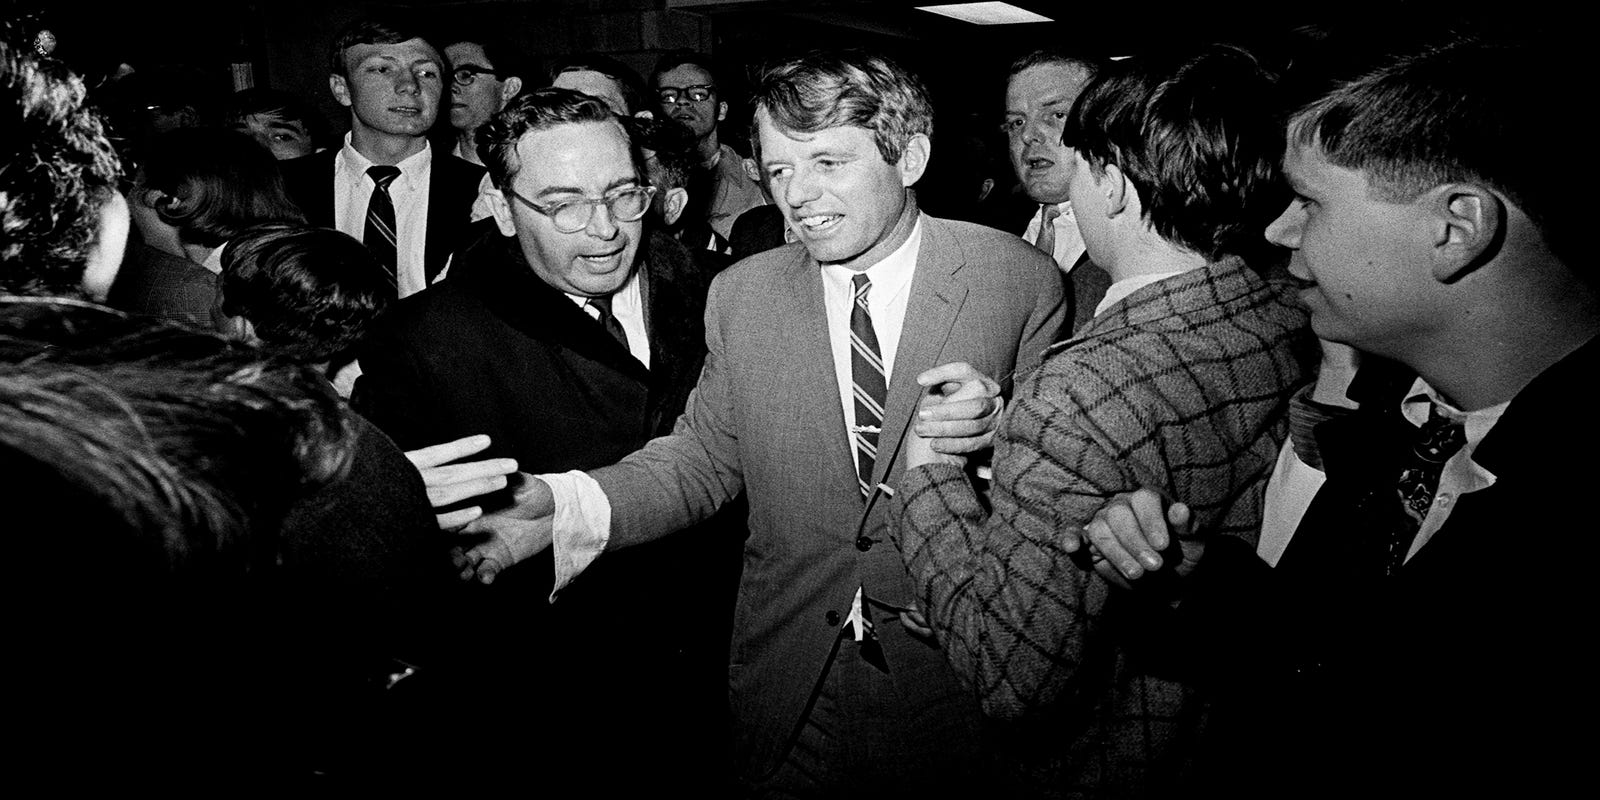 Bobby Kennedy's assassination changed history